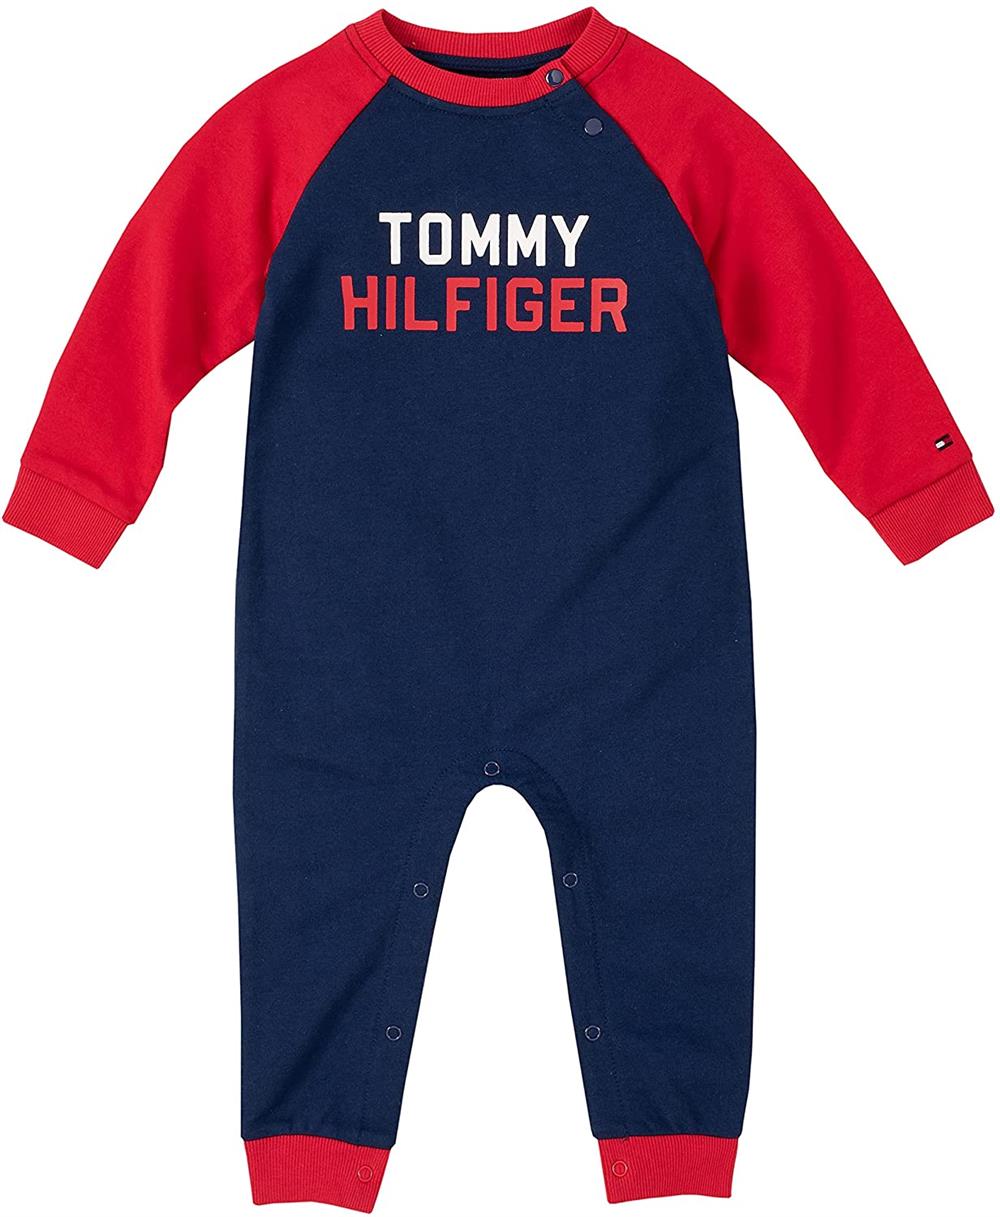 Tommy Hilfiger Boys 12-24 Months Long Sleeve Coverall